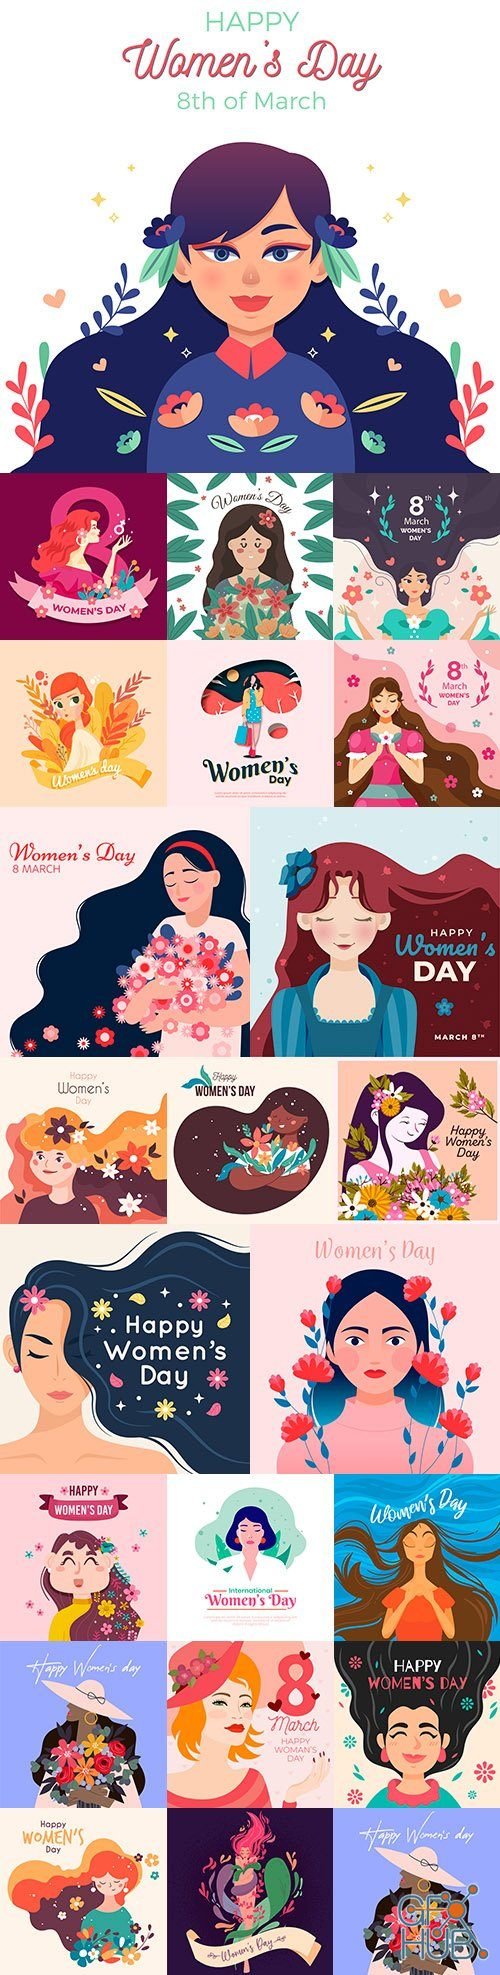 March 8 and Women's Day illustration flat big collection